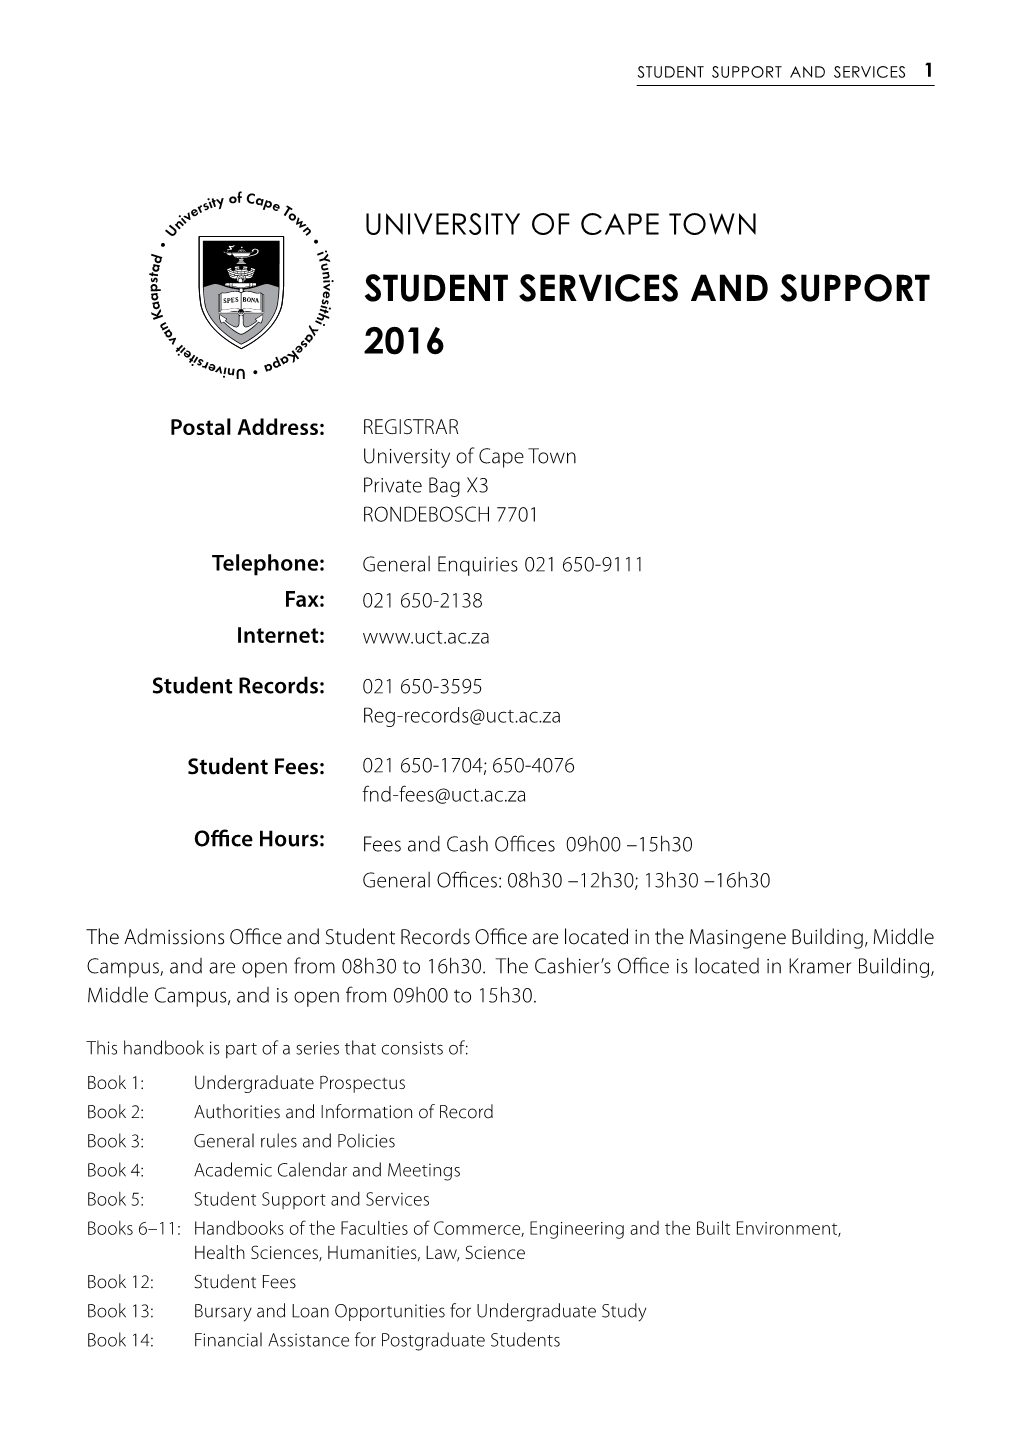 Student Services and Support 2016